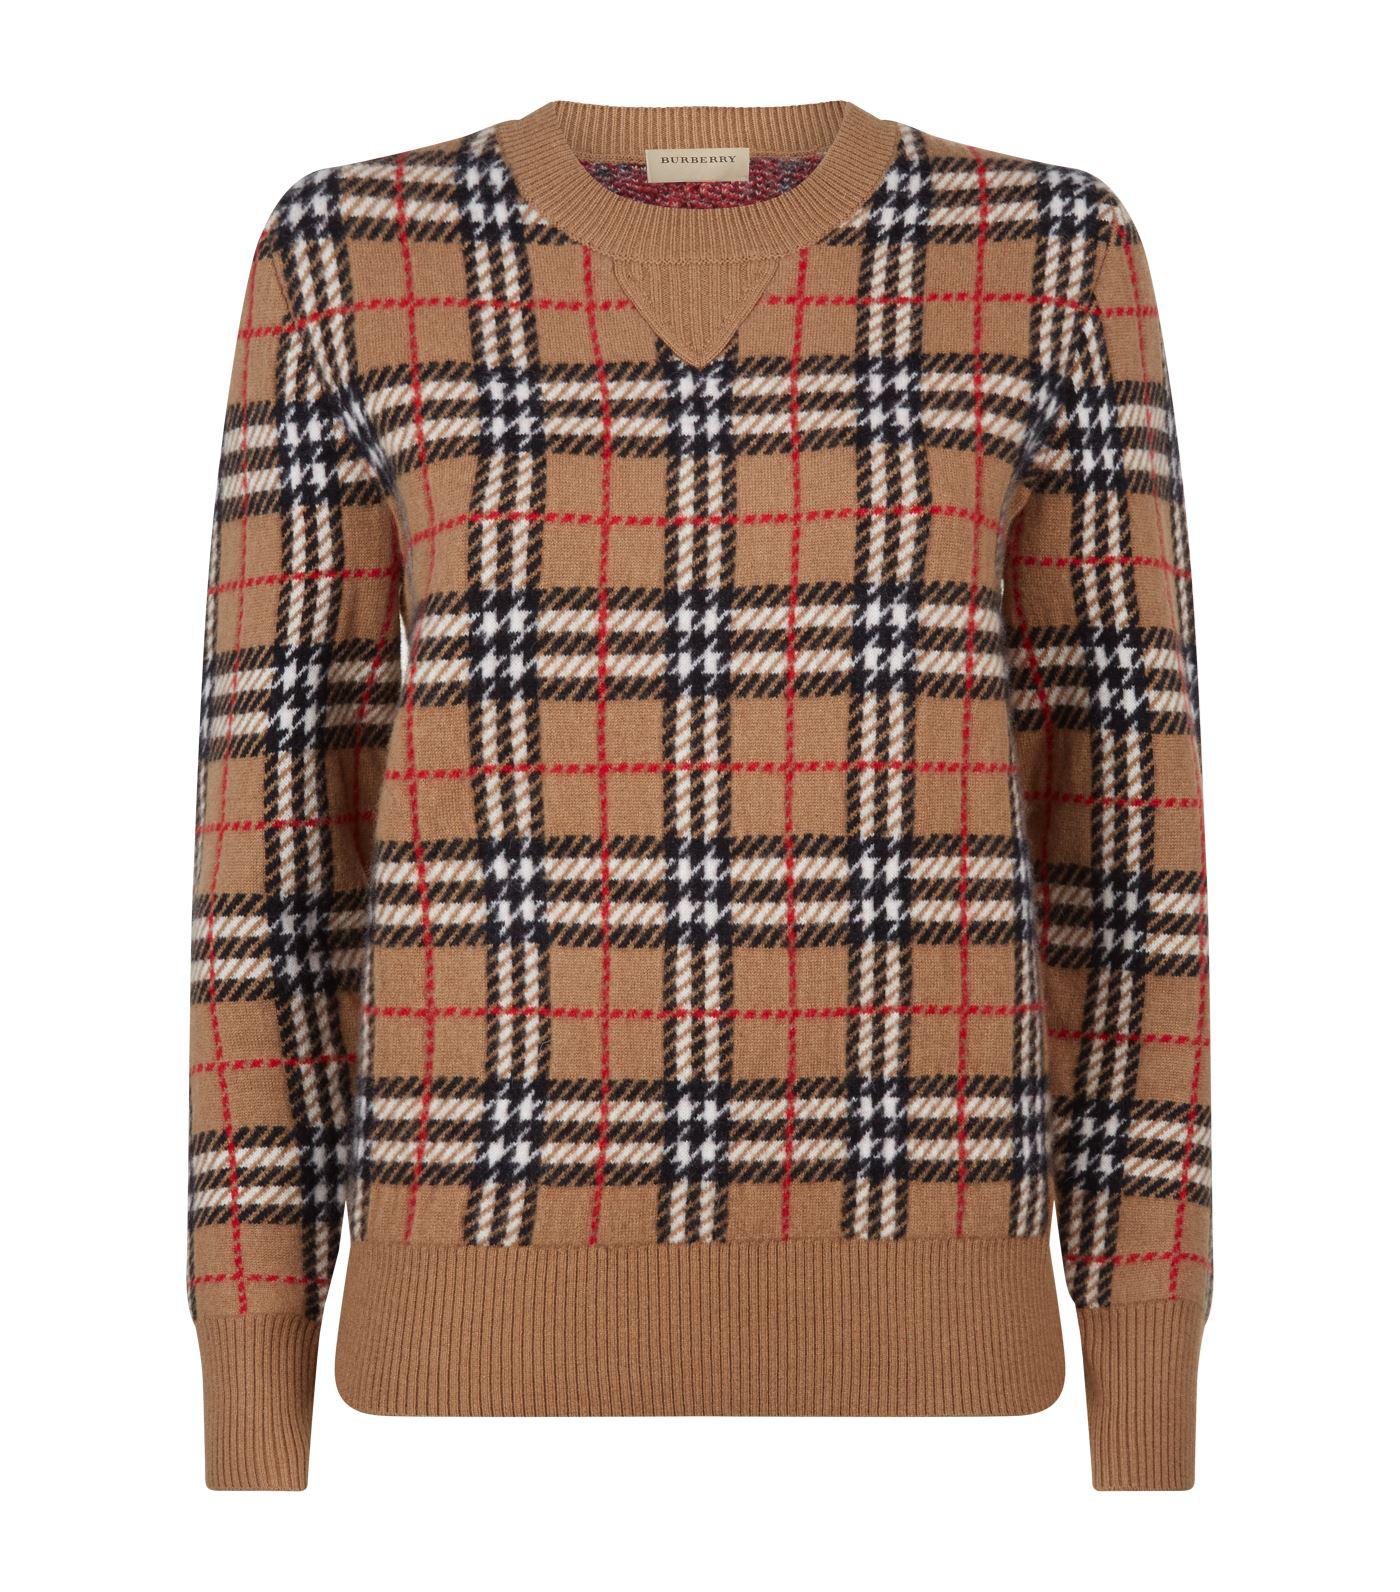 Lyst - Burberry Vintage Check Cashmere Jacquard Sweater in Brown - Save 19%